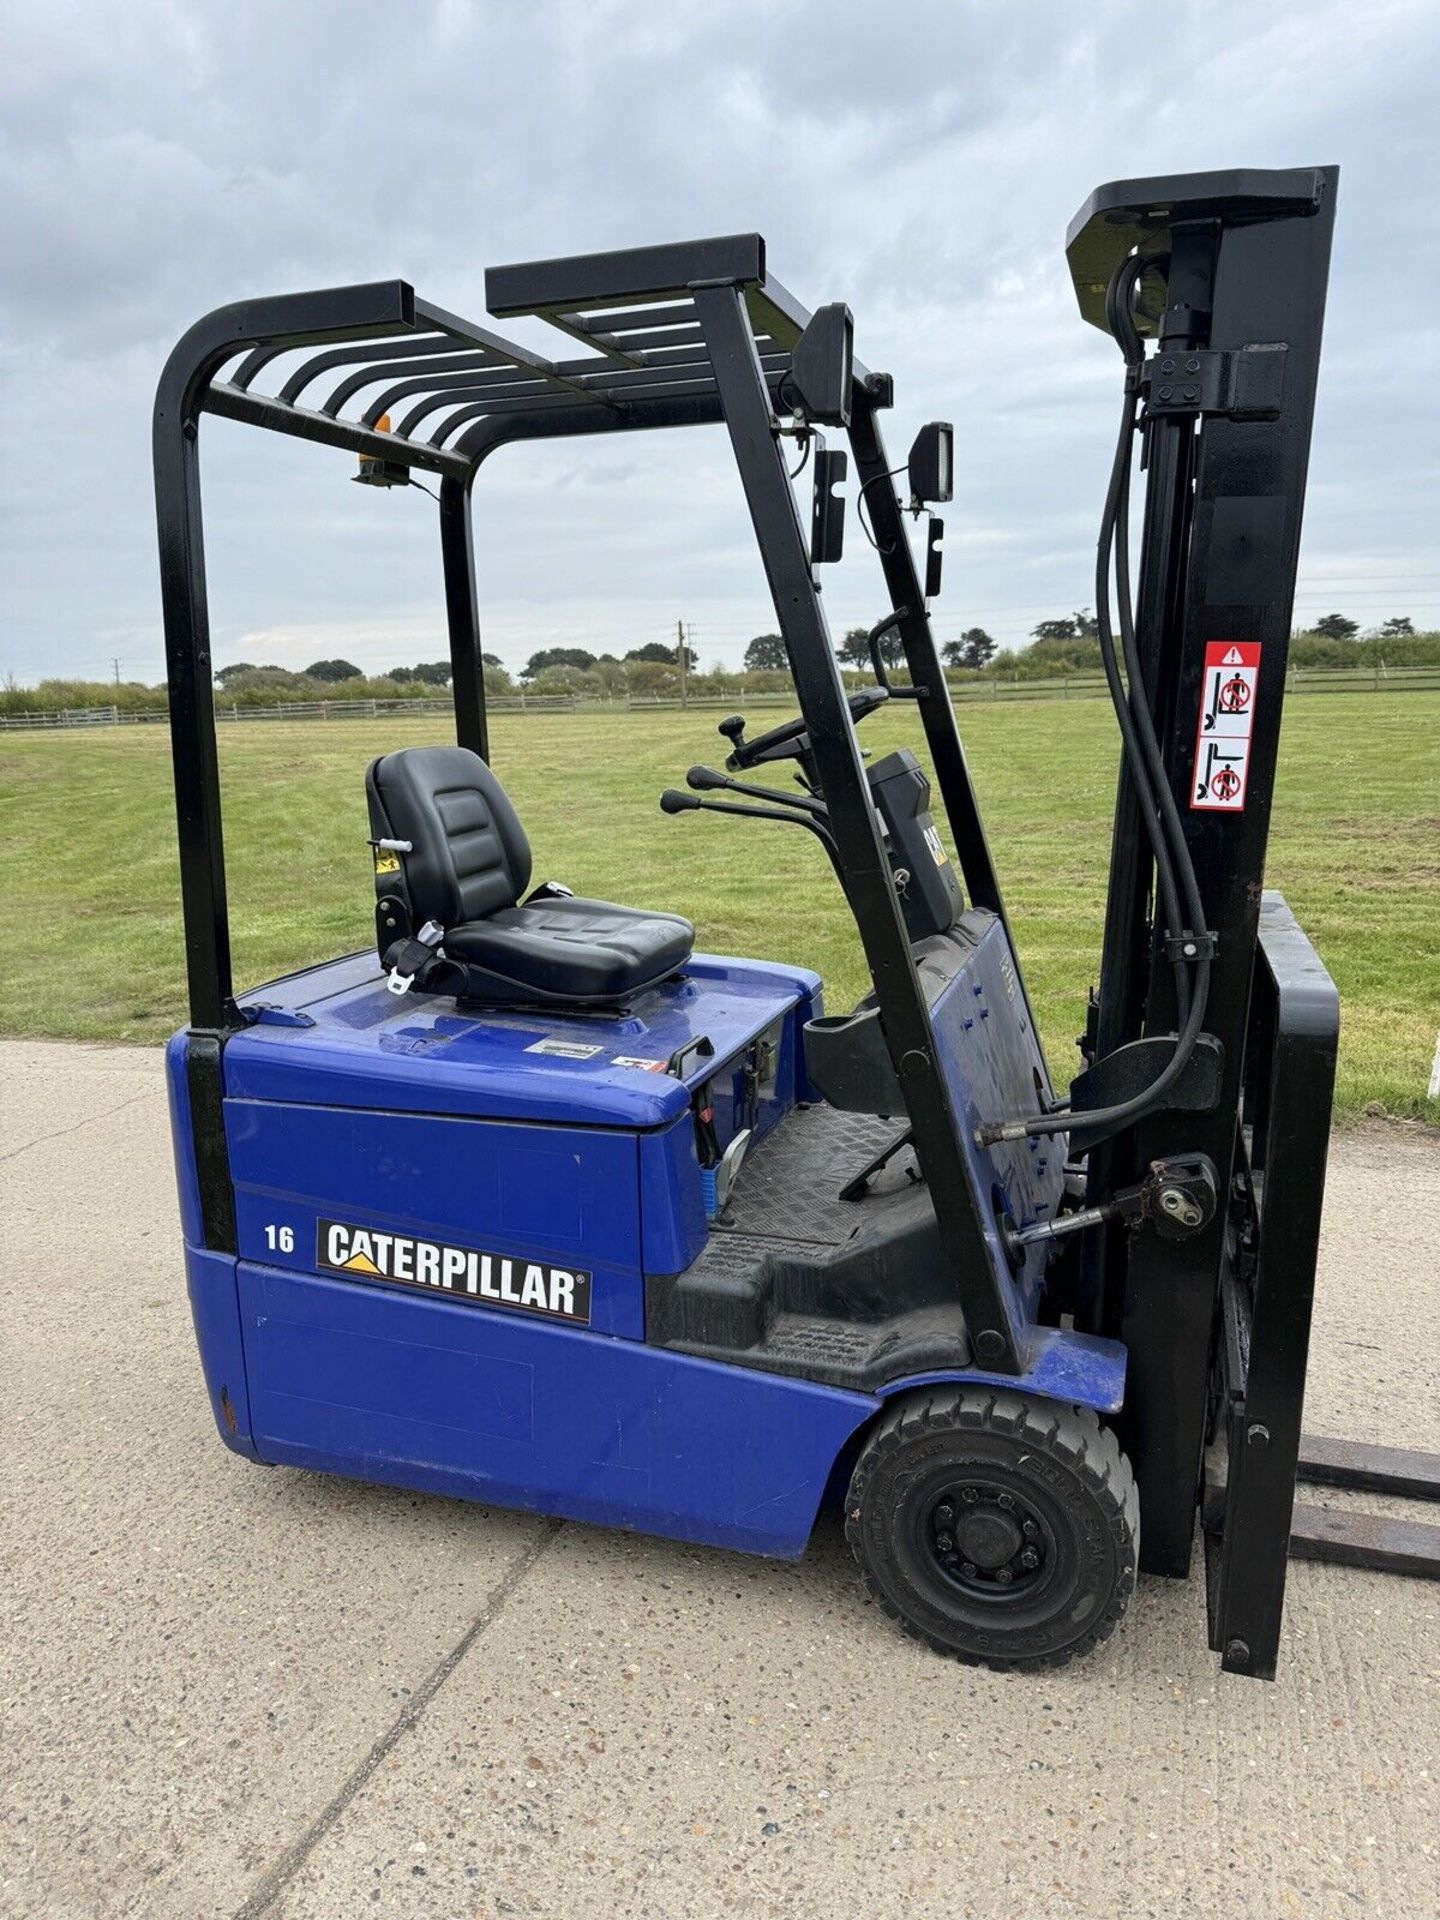 CATERPILLAR, 1.6 Tonne Electric Forklift Truck - Container Spec - Image 2 of 5